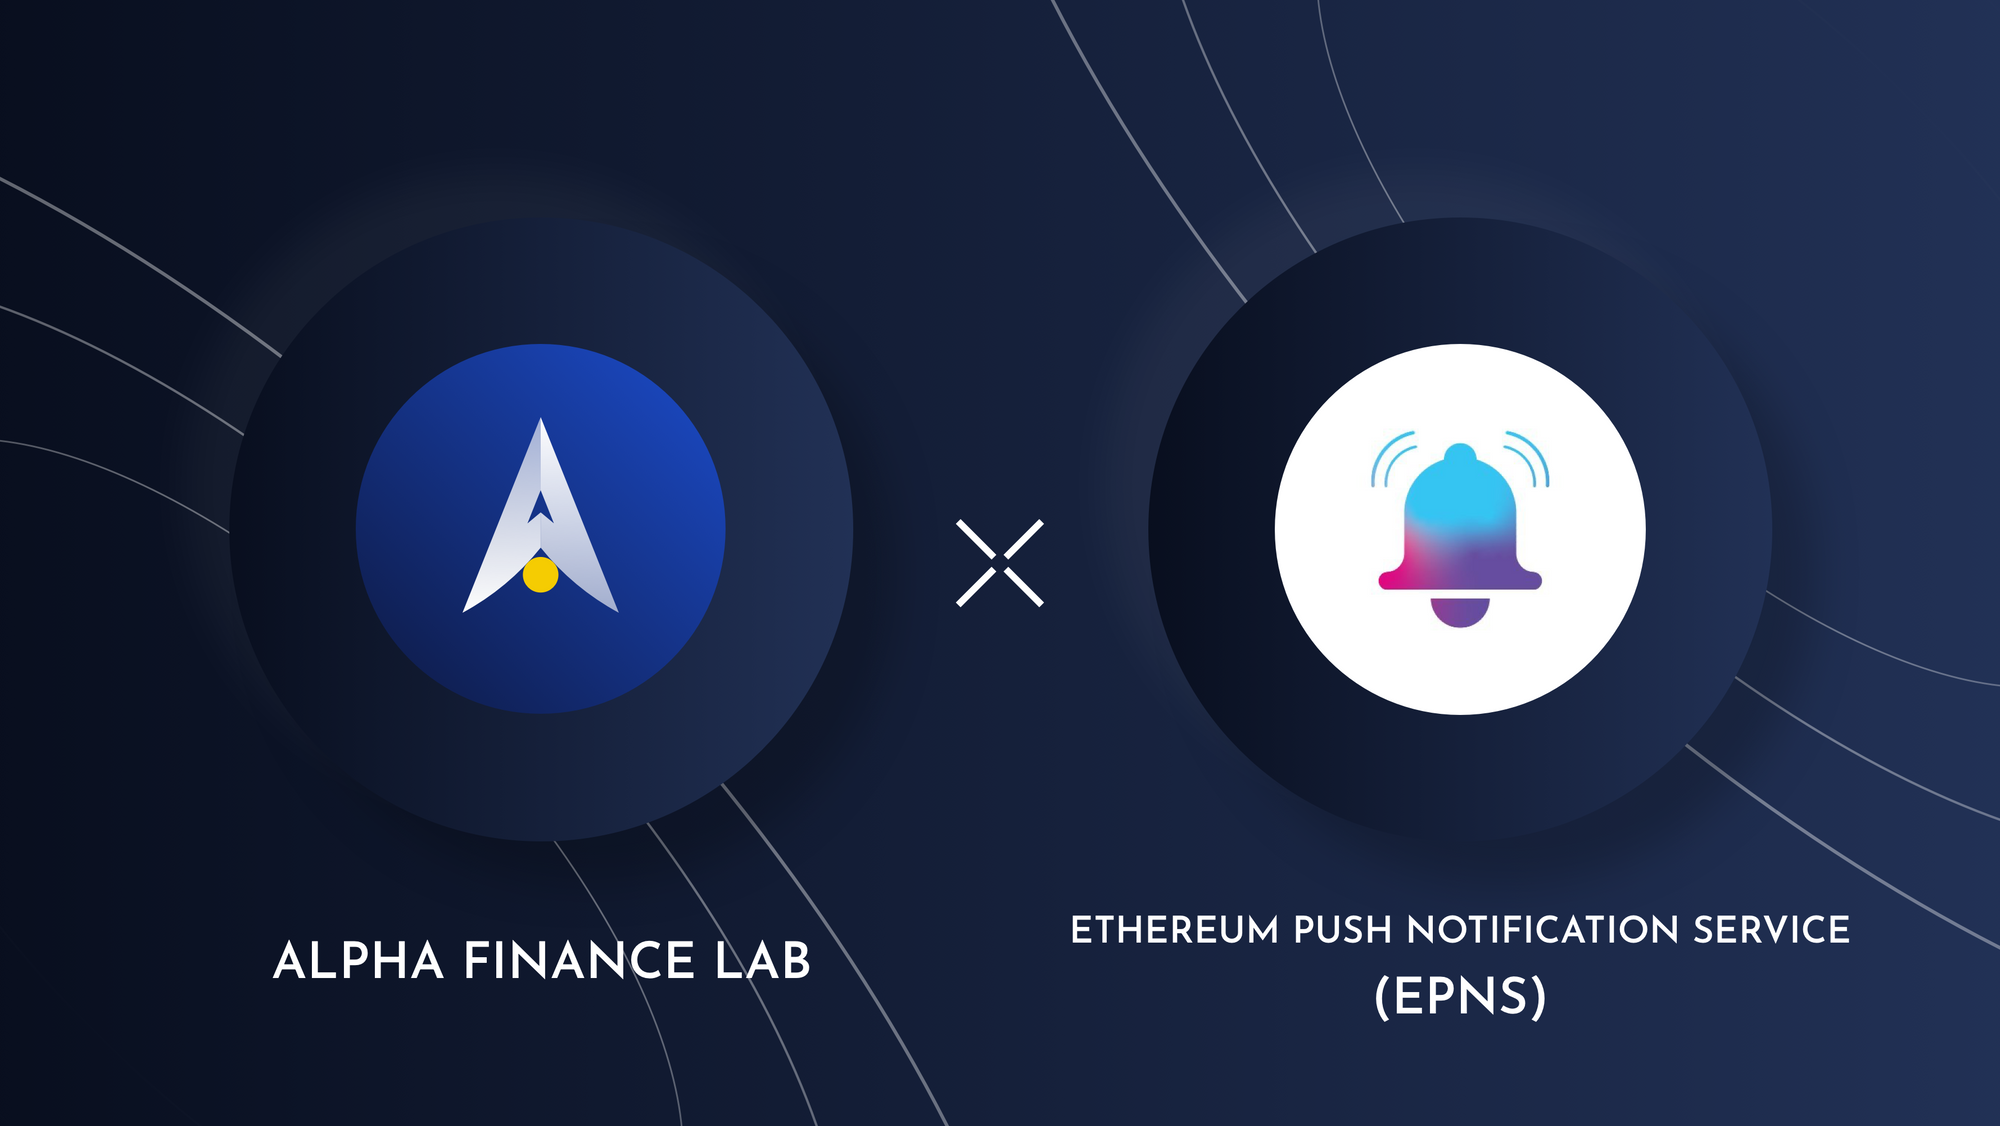 Alpha Finance Lab Partners With EPNS To Bring Better Notification System To Alpha Homora Users